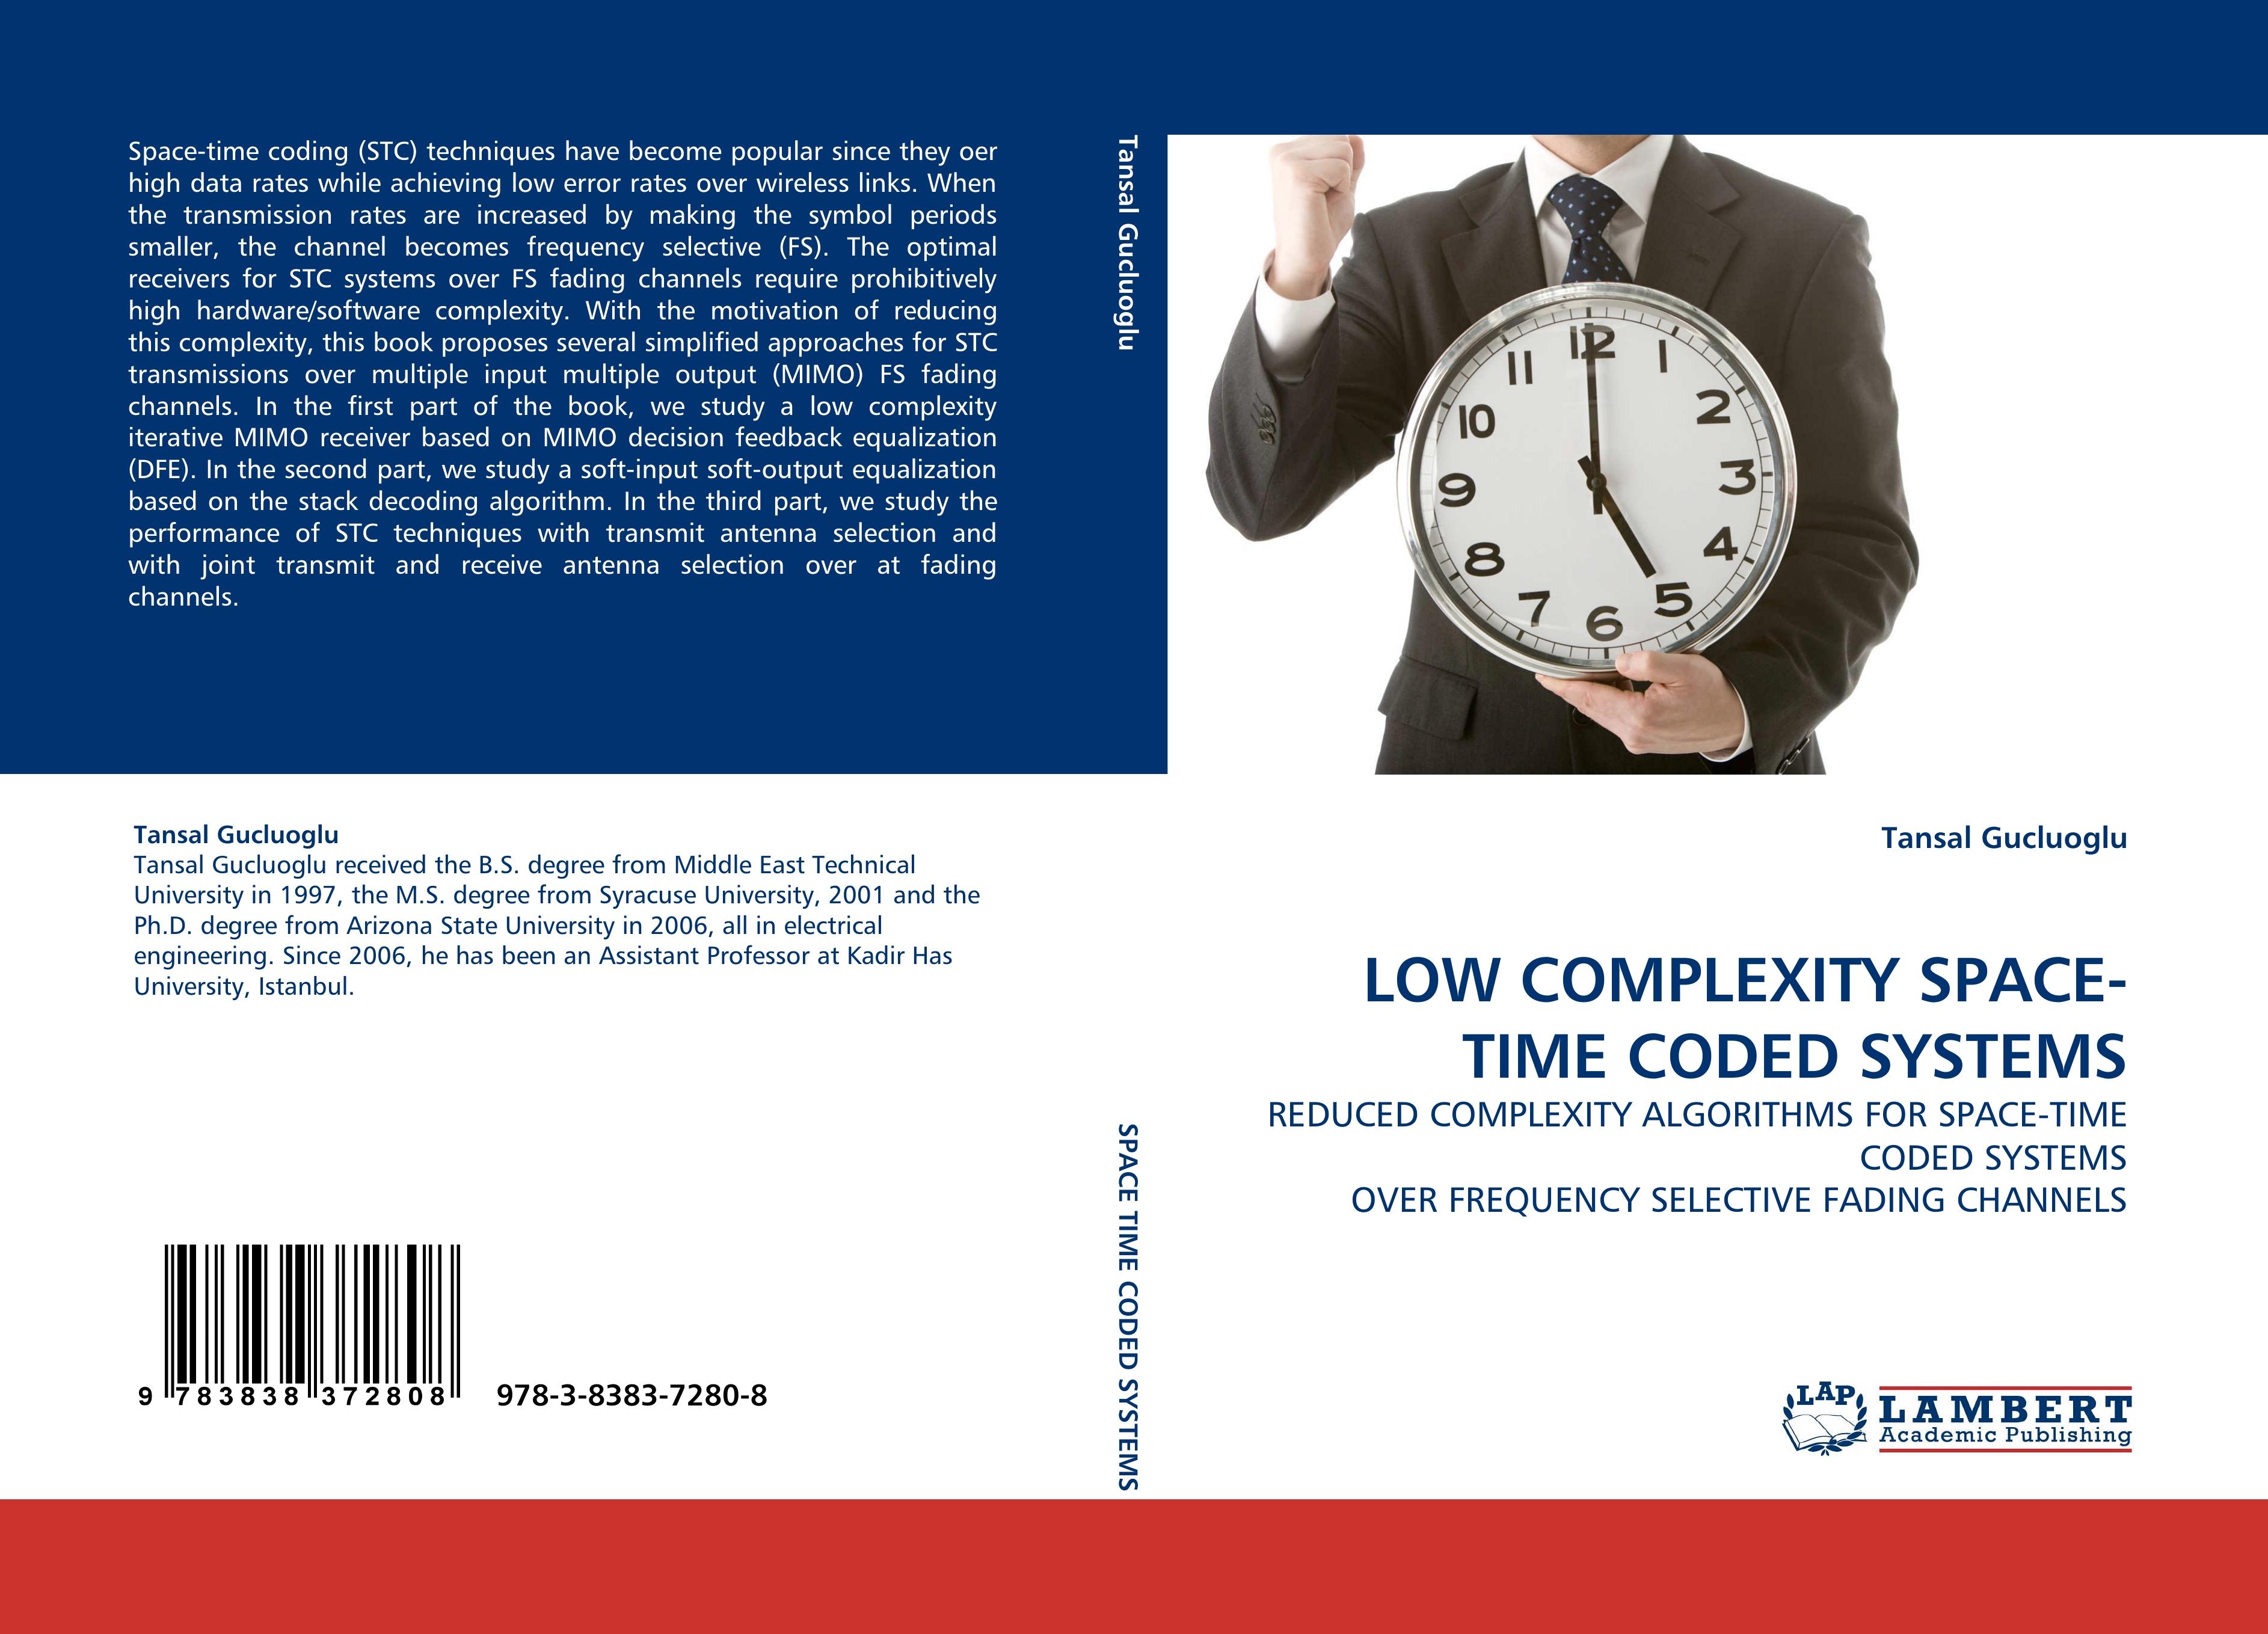 LOW COMPLEXITY SPACE-TIME CODED SYSTEMS | REDUCED COMPLEXITY ALGORITHMS FOR SPACE-TIME CODED SYSTEMS OVER FREQUENCY SELECTIVE FADING CHANNELS | Tansal Gucluoglu | Taschenbuch | Paperback | 156 S. - Gucluoglu, Tansal